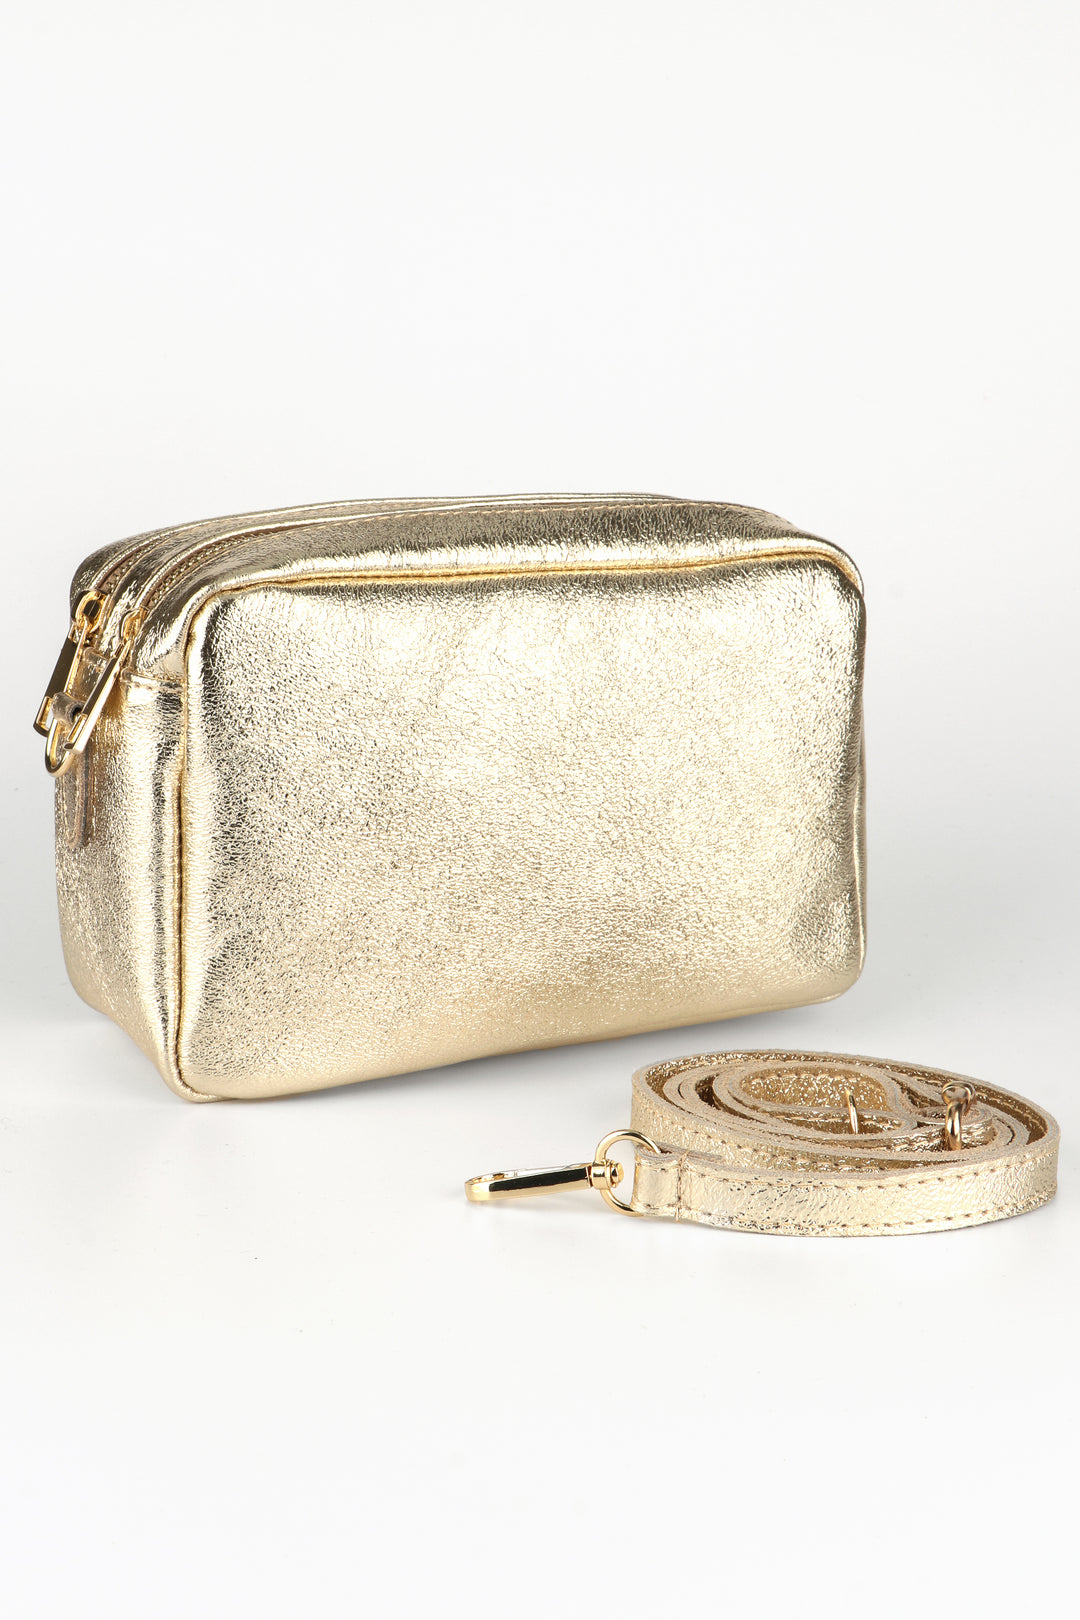 gold leather cross body camera bag with a matching detachable bag strap and two zip closing compartments